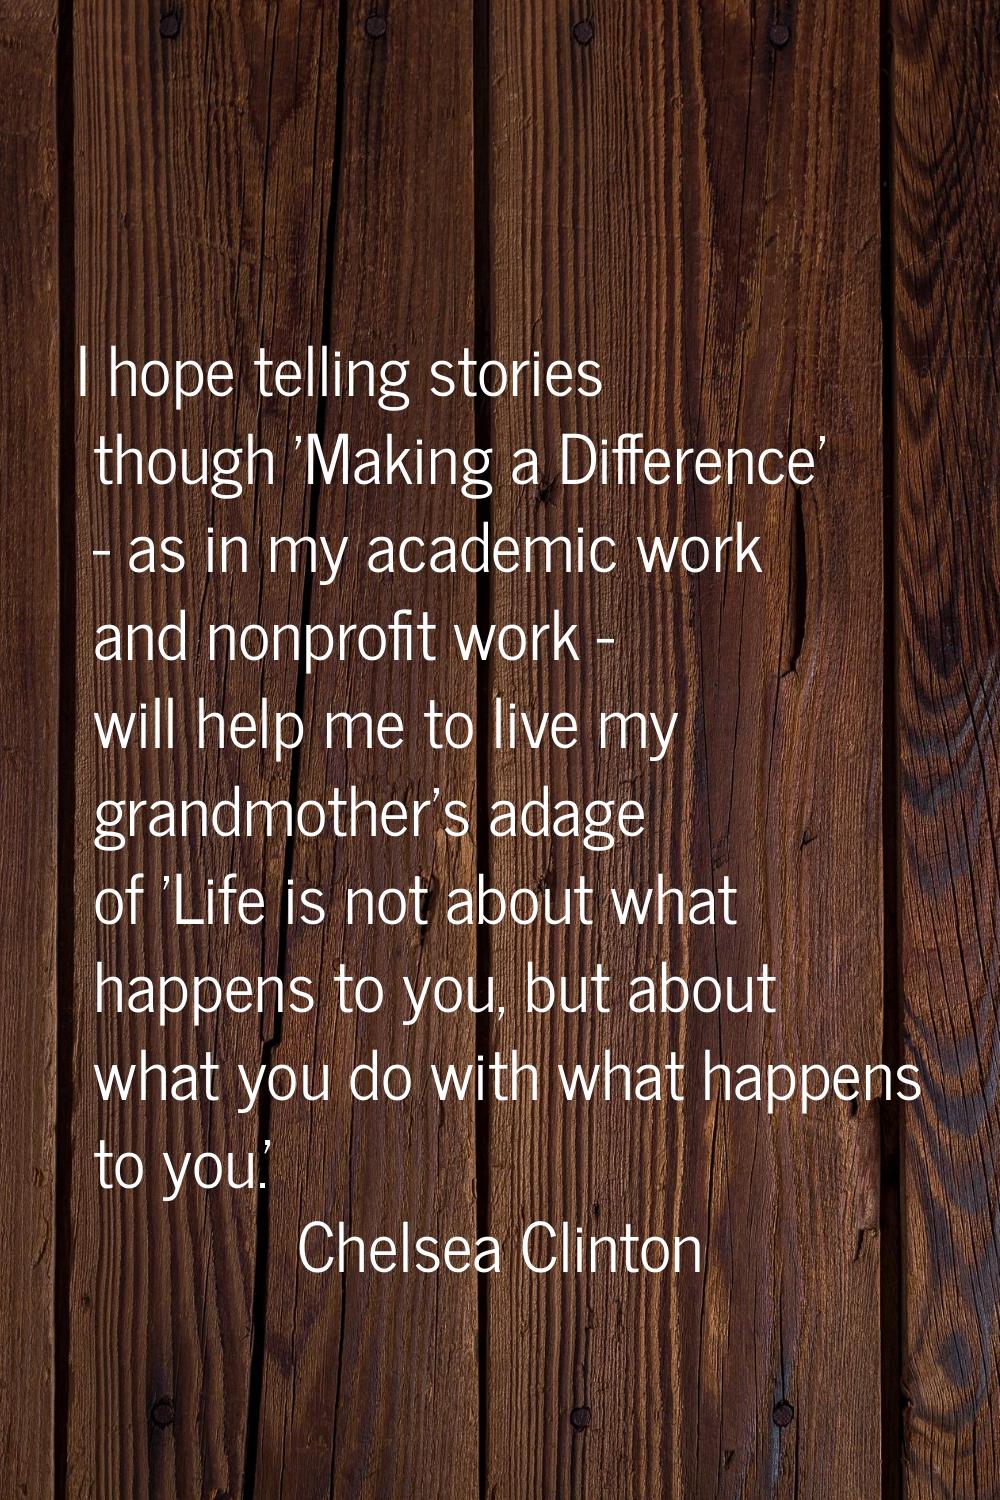 I hope telling stories though 'Making a Difference' - as in my academic work and nonprofit work - w